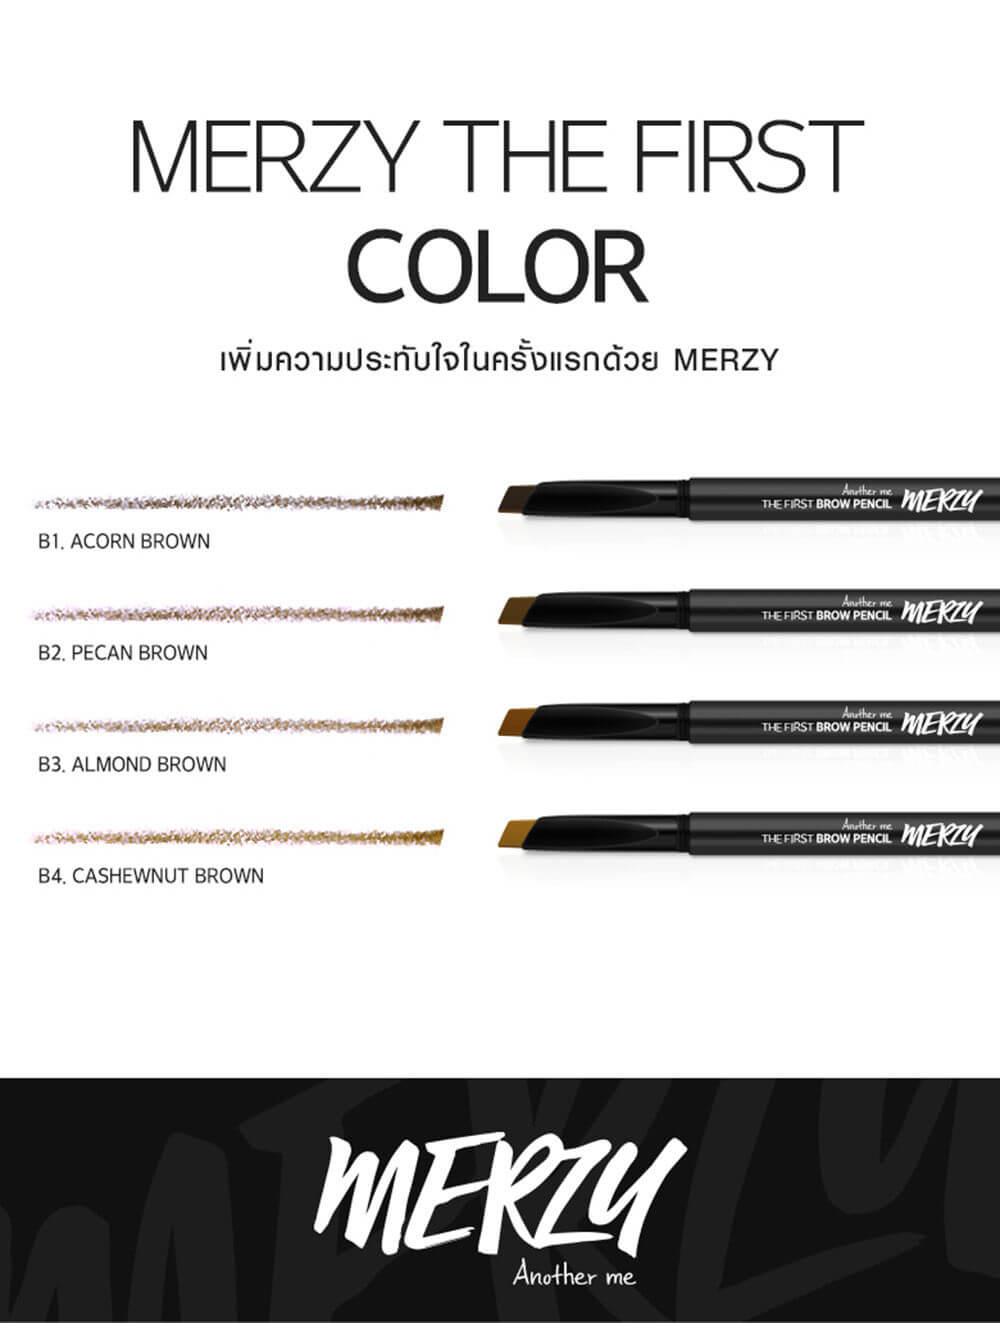 The First Brown Pencil,Merzy The First Brown Pencil, Merzy The First Brown Pencil #B1 ACORN BROWN, Merzy The First Brown Pencil #B1 ACORN BROWNรีวิว, Merzy The First Brown Pencil #B1 ACORN BROWNราคา, Merzy The First Brown Pencil #B1 ACORN BROWNขายดี, Merzy The First Brown Pencil #B1 ACORN BROWNพร้อมส่ง, Merzy The First Brown Pencil  ACORN BROWN